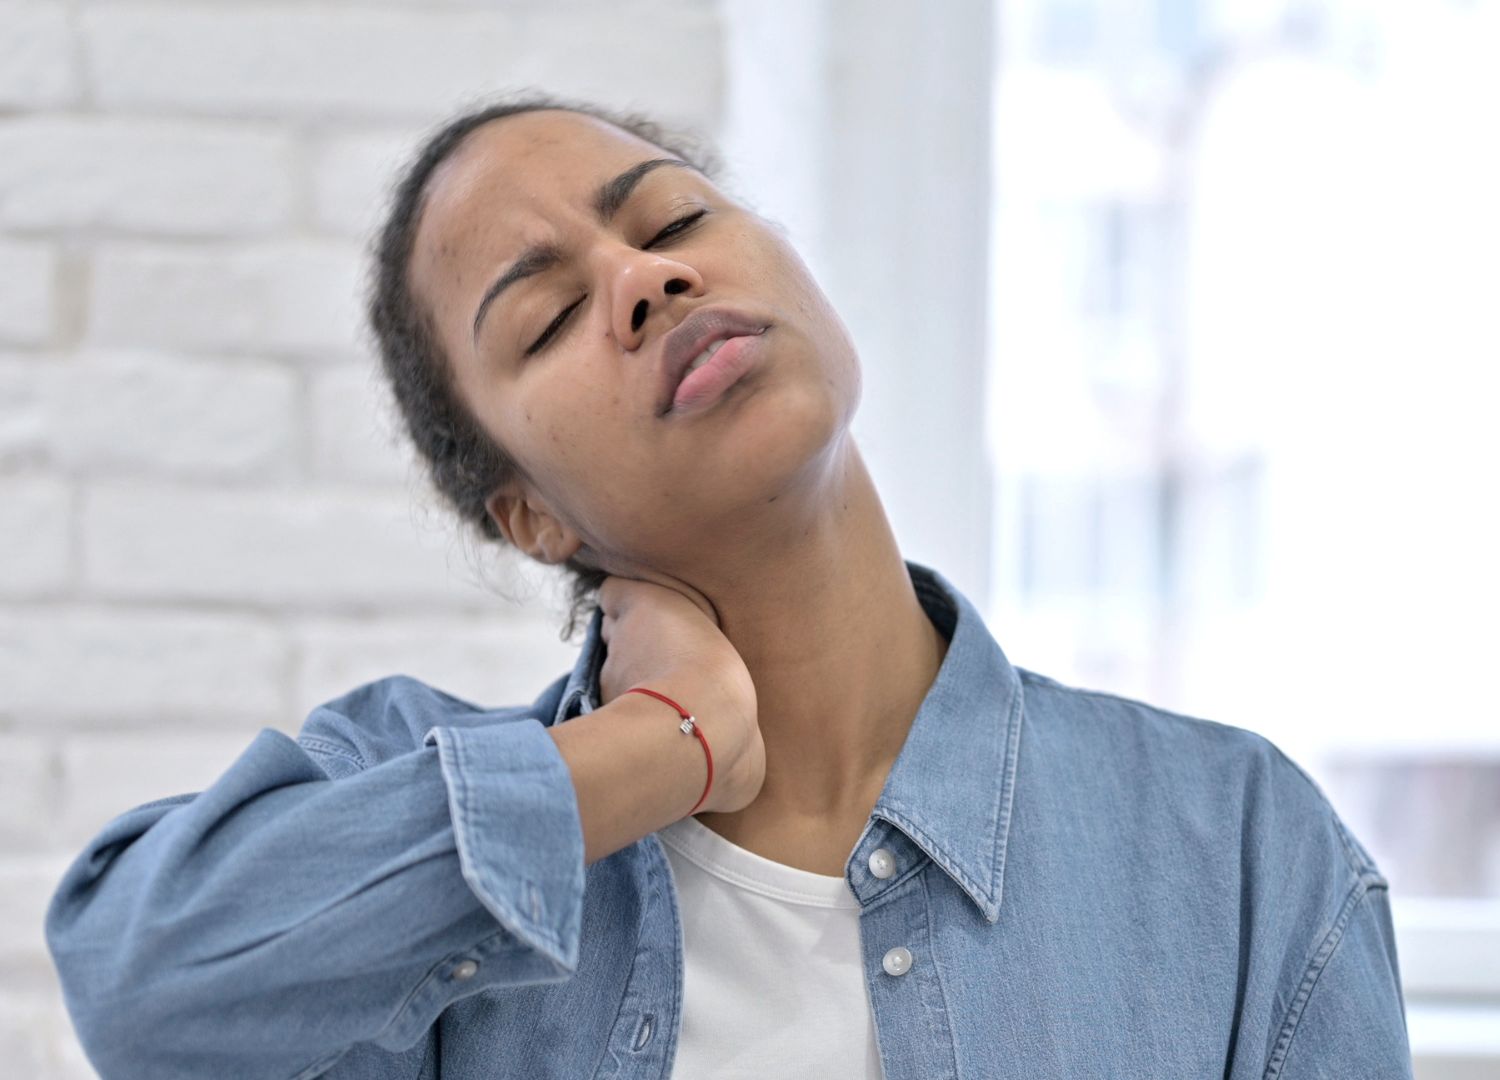 Neck pain: When you should be concerned